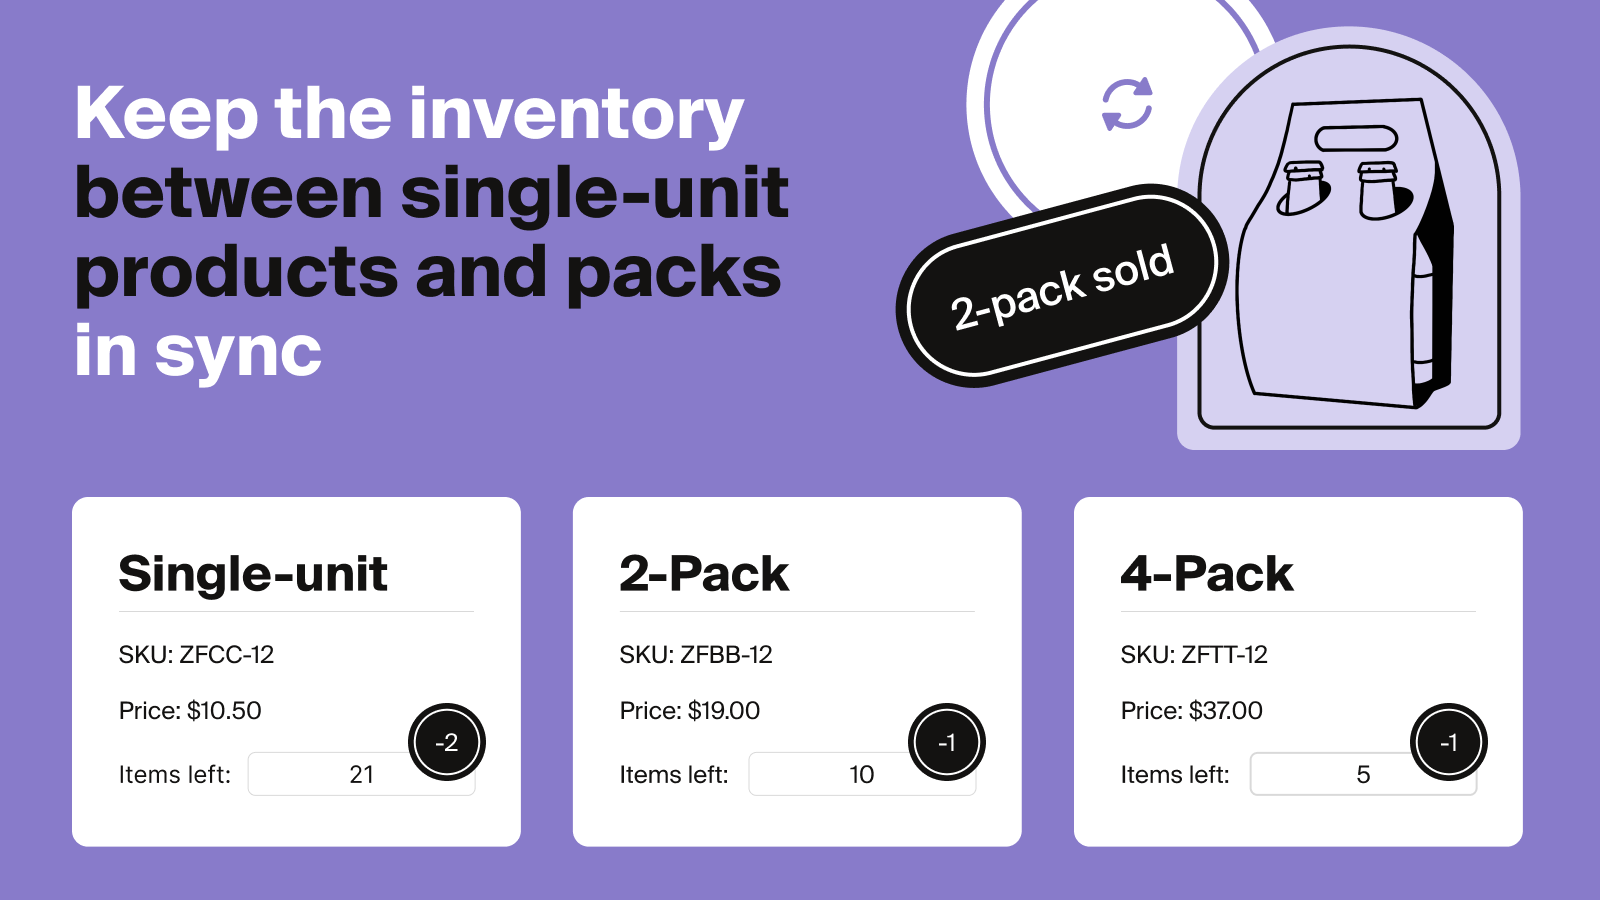 Keep inventory between single-unit products and packs in sync